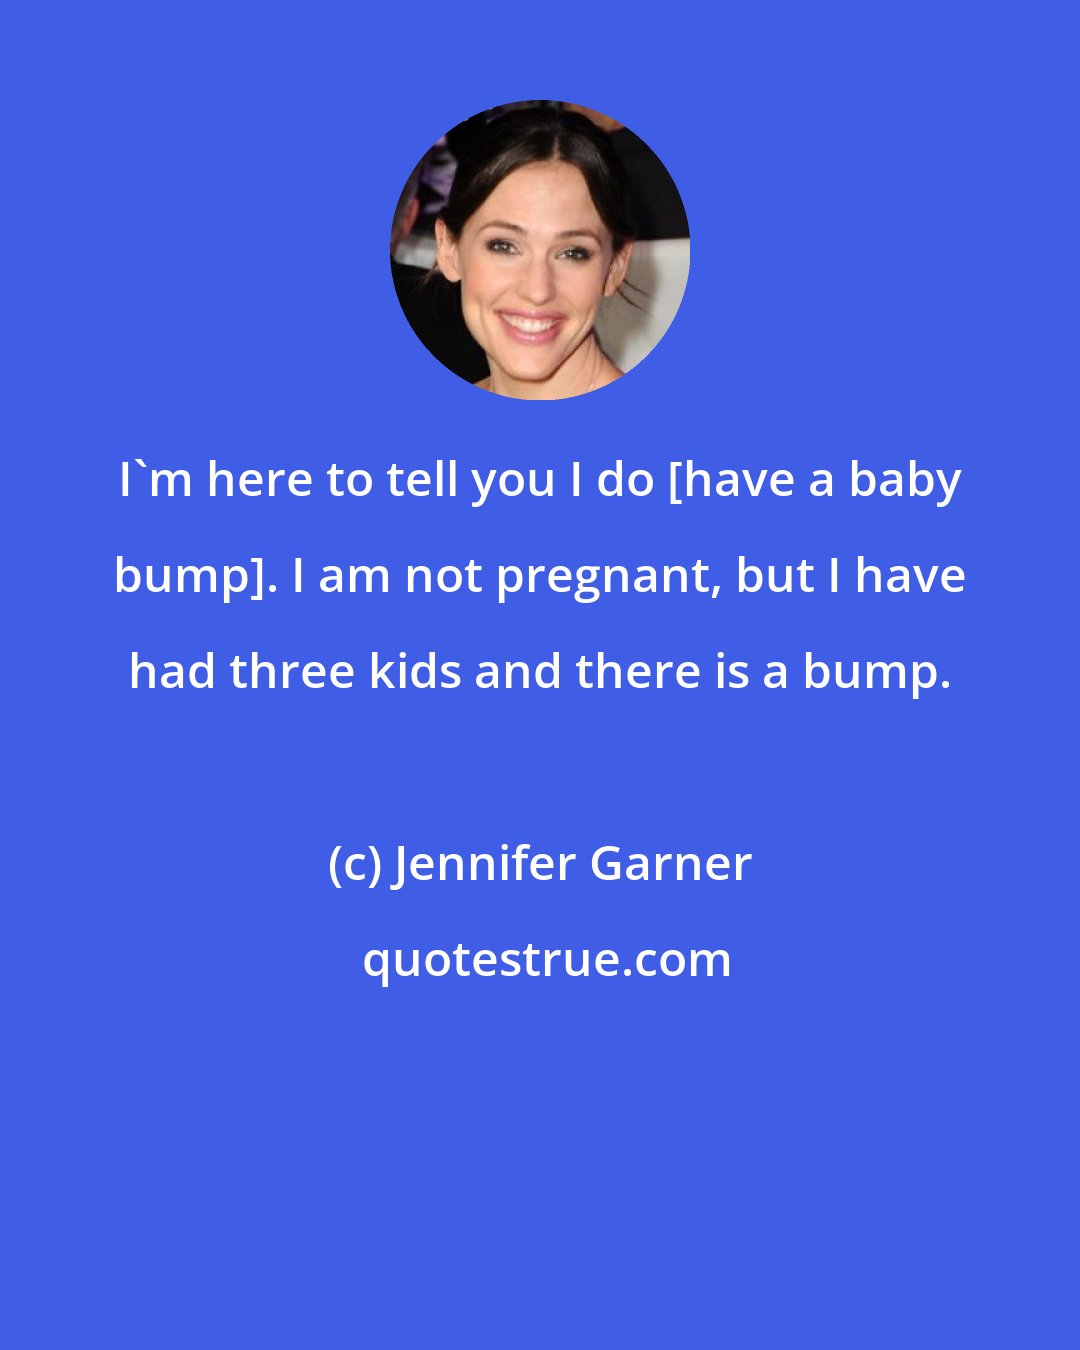 Jennifer Garner: I'm here to tell you I do [have a baby bump]. I am not pregnant, but I have had three kids and there is a bump.